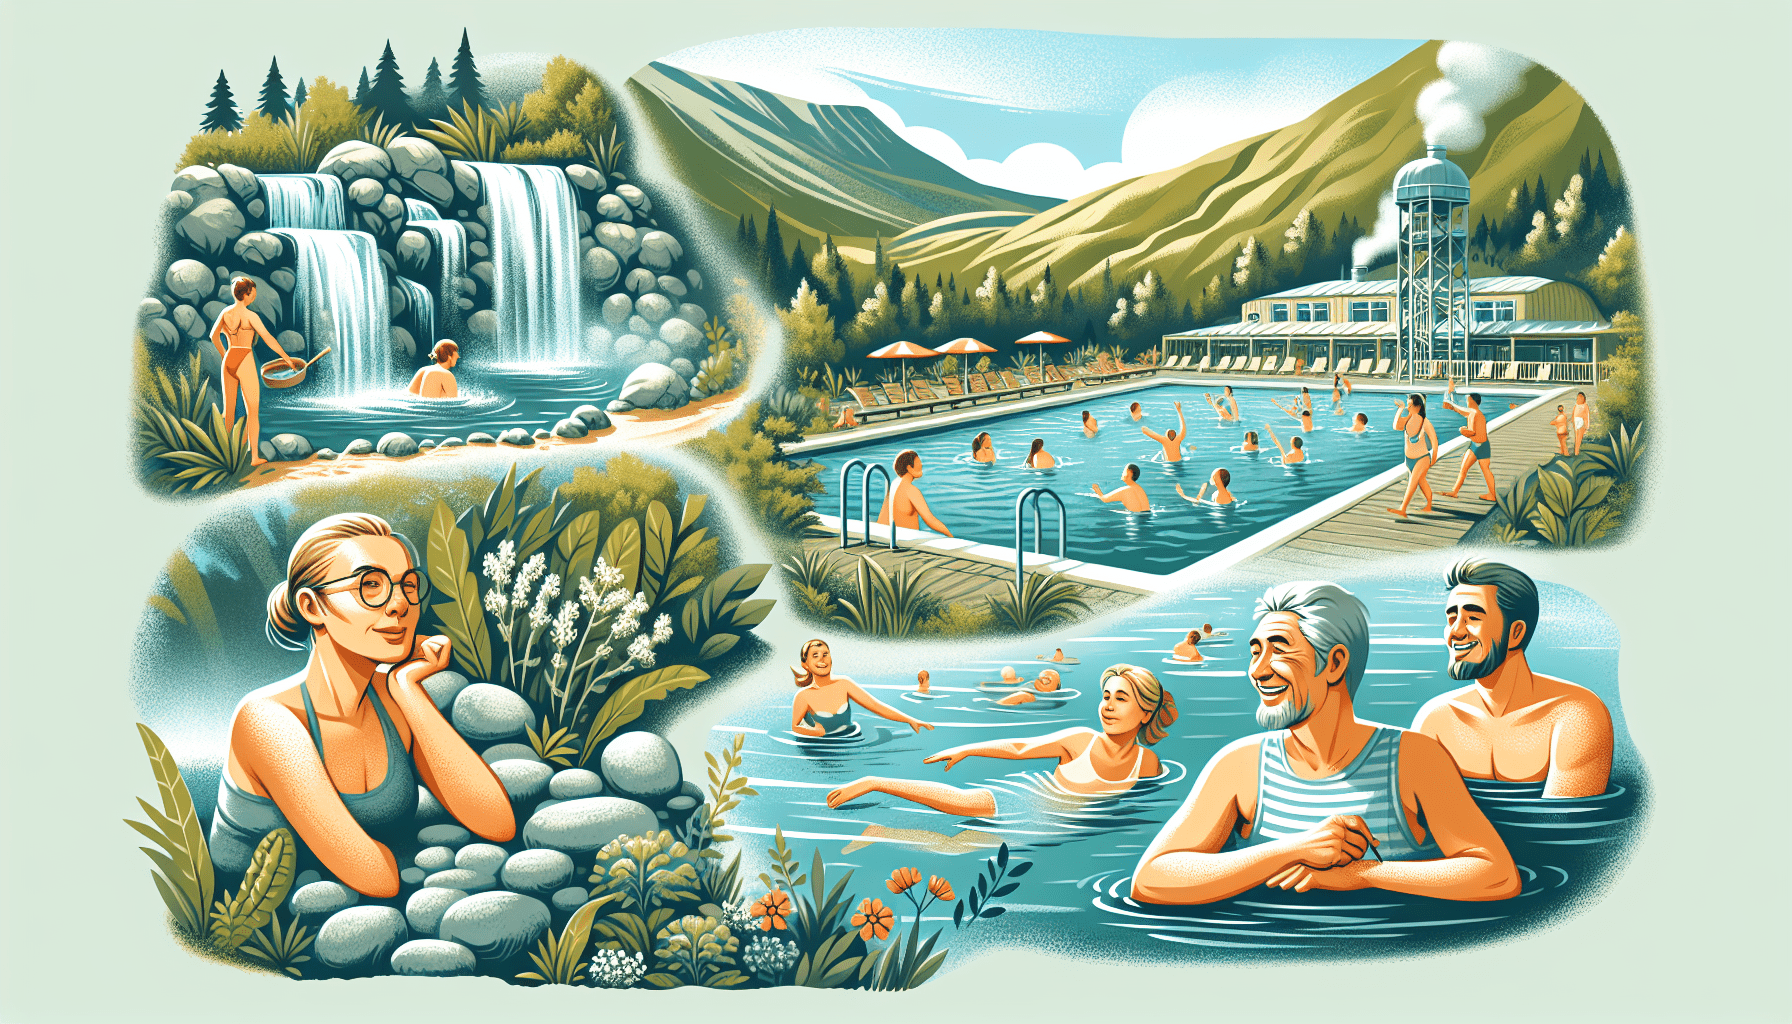 What Are The Benefits Of Lava Hot Springs?